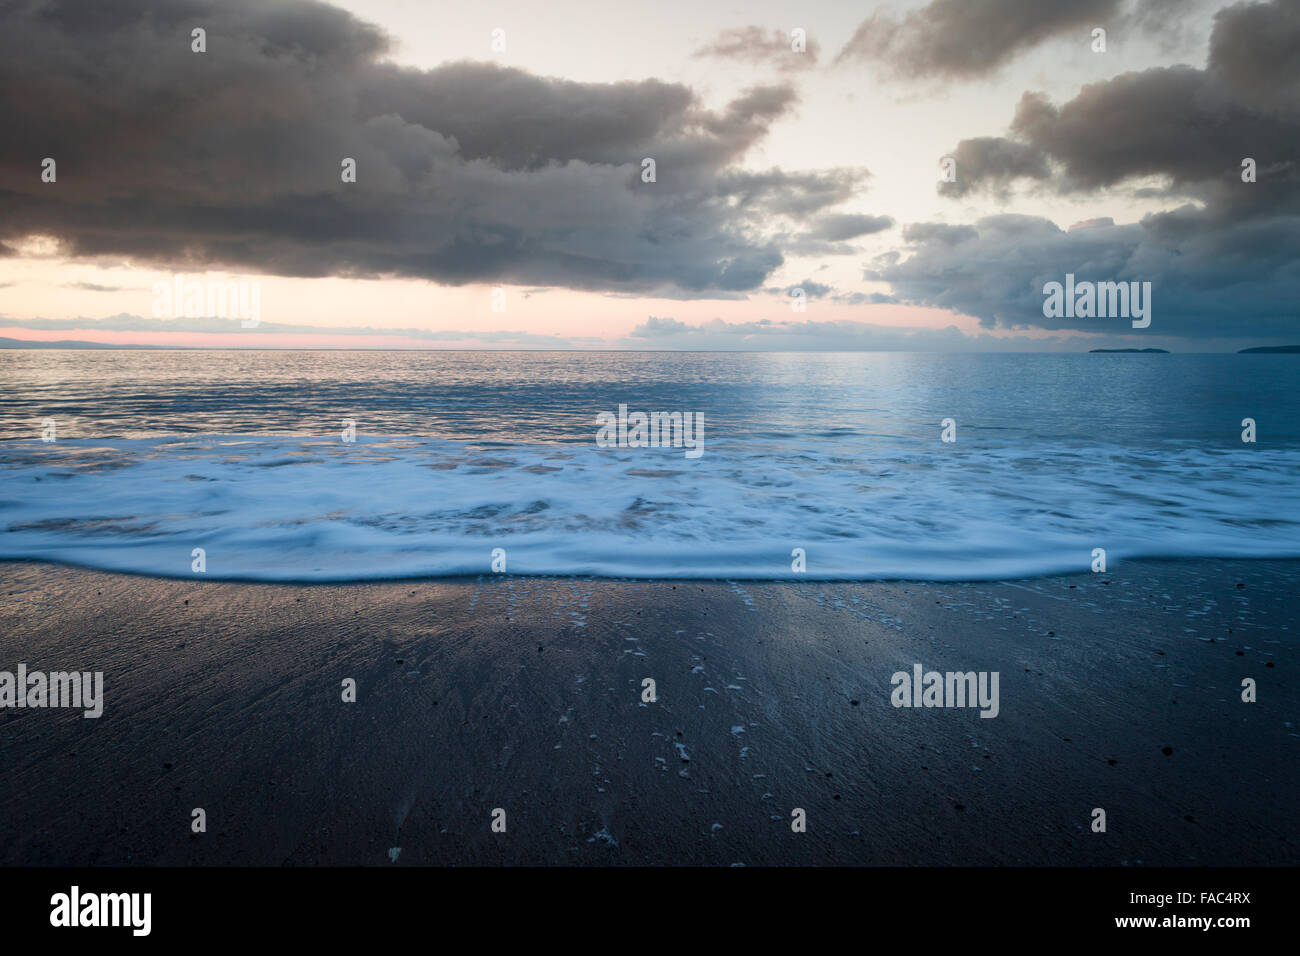 Rainy Sunrise Clouds over Coastal Beach with Wave in Motion Stock Photo